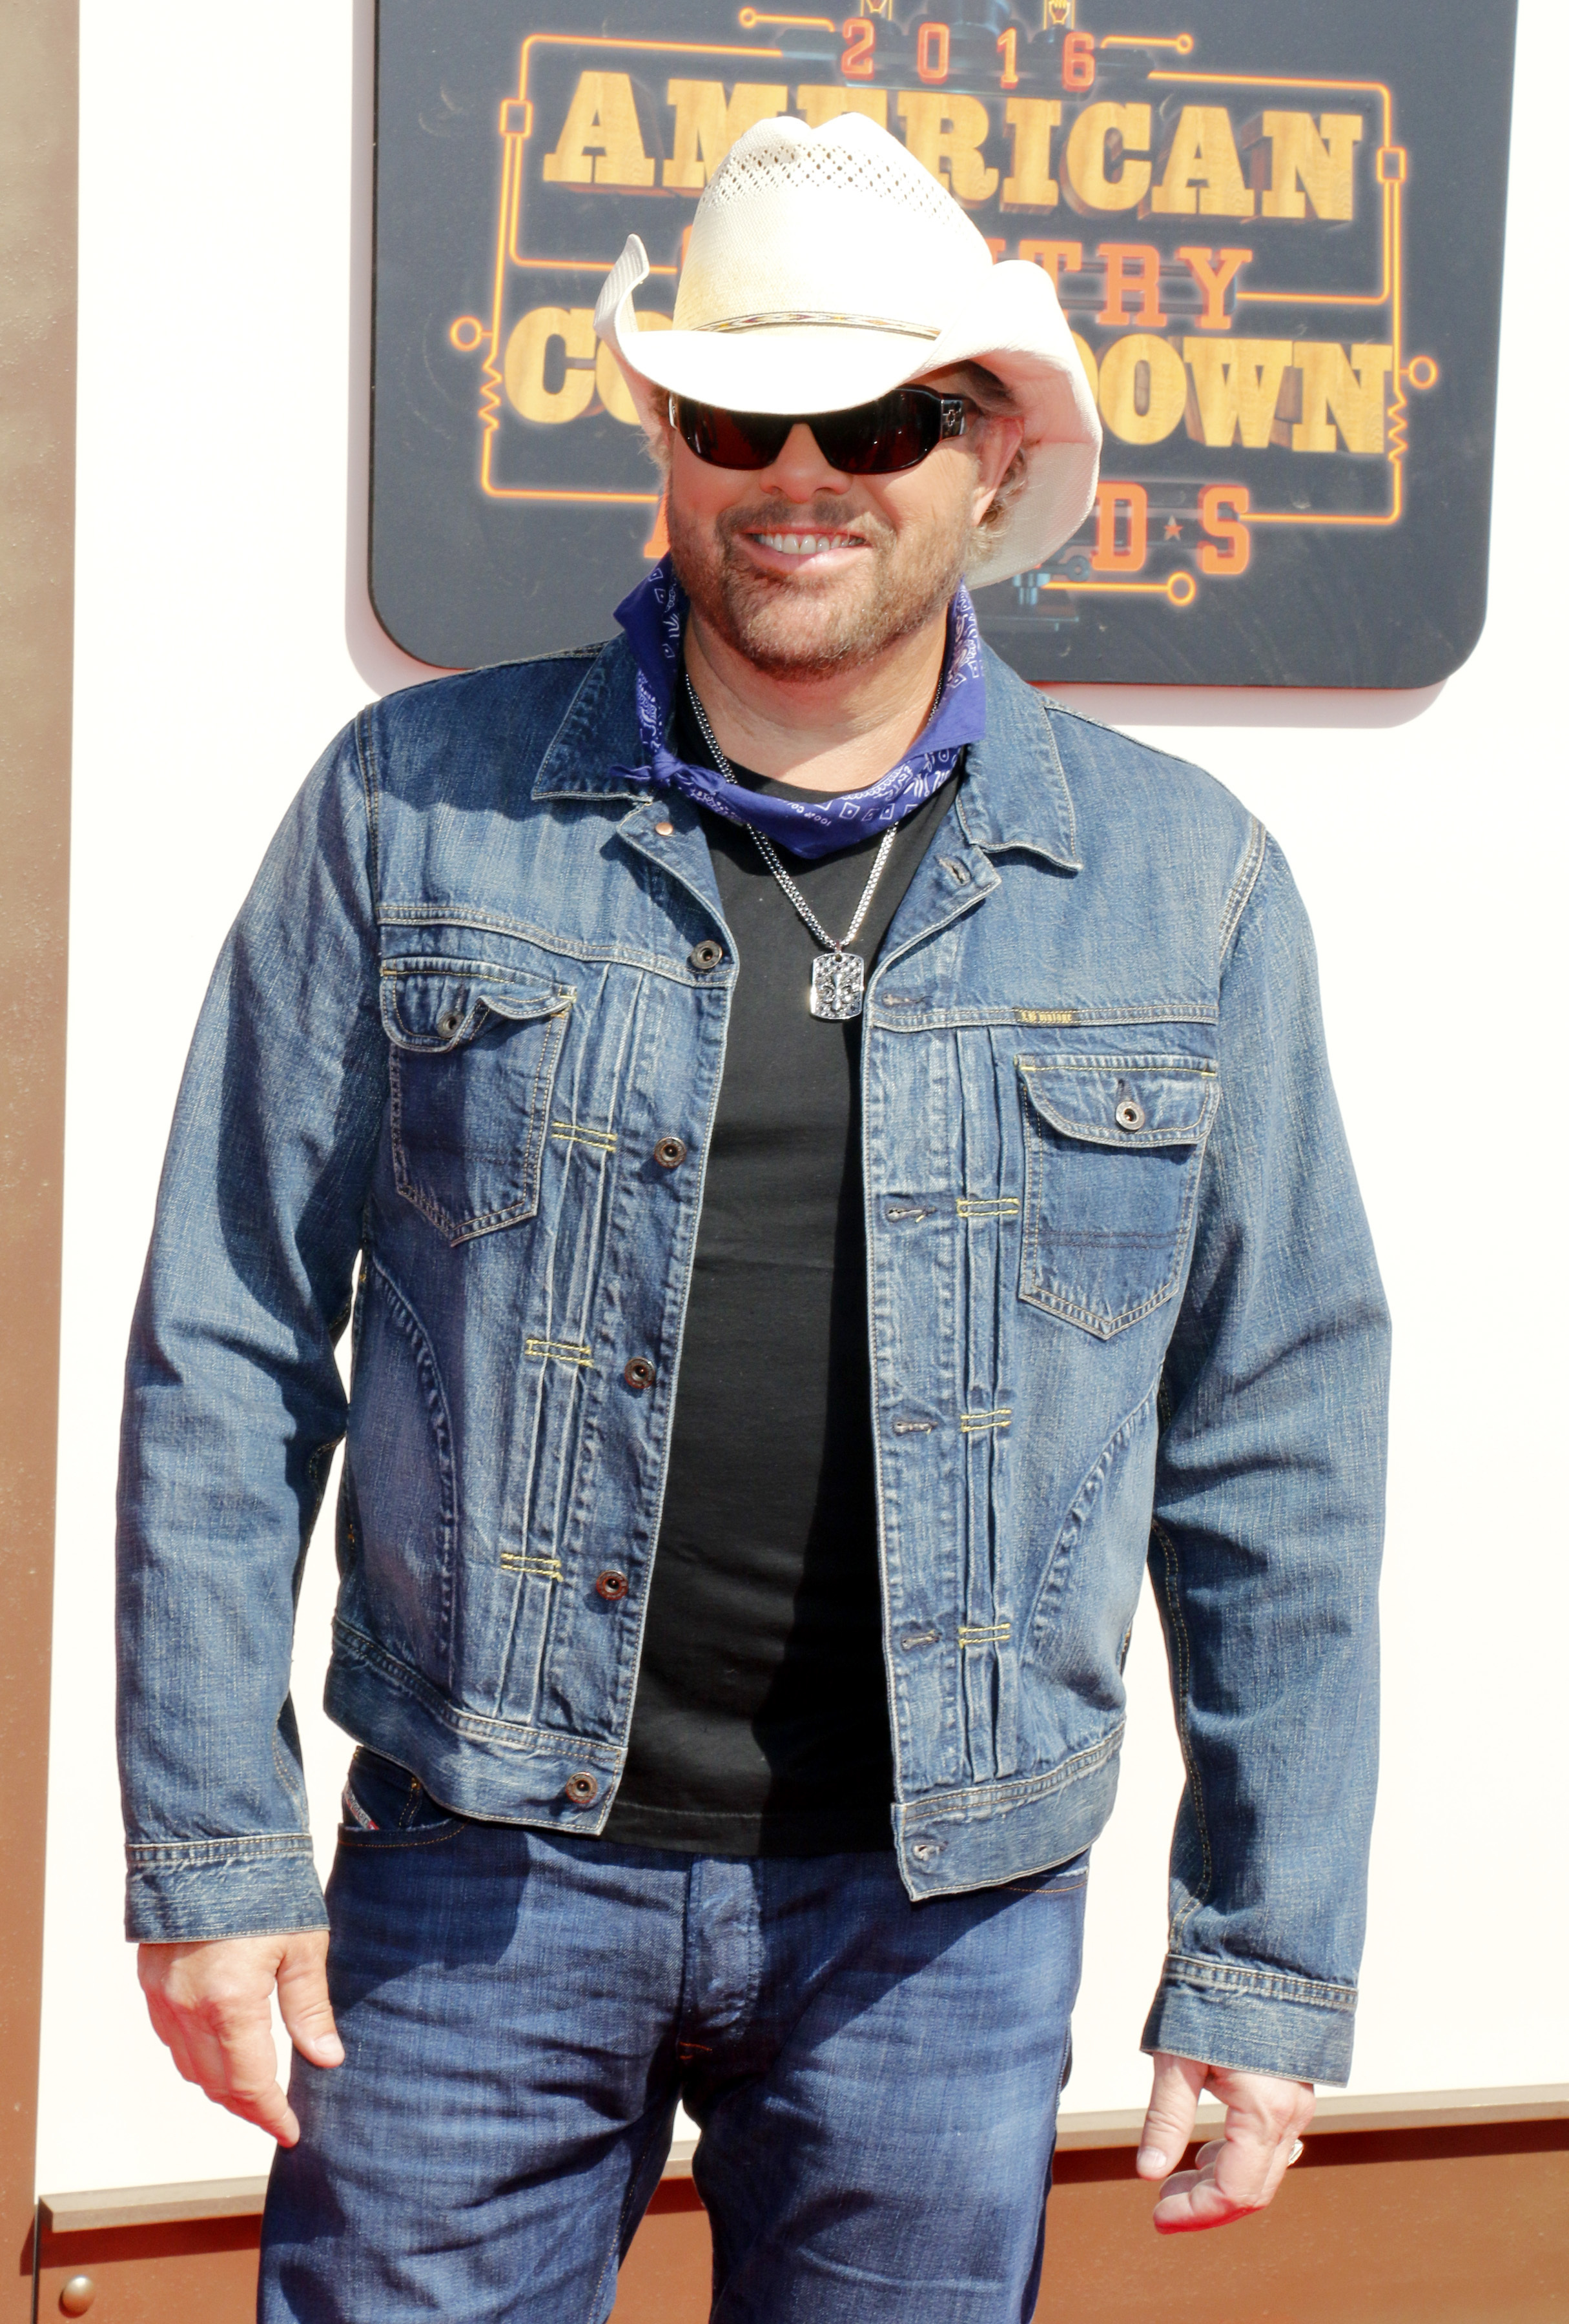 Toby Keith at the 2016 American Country Countdown Awards.